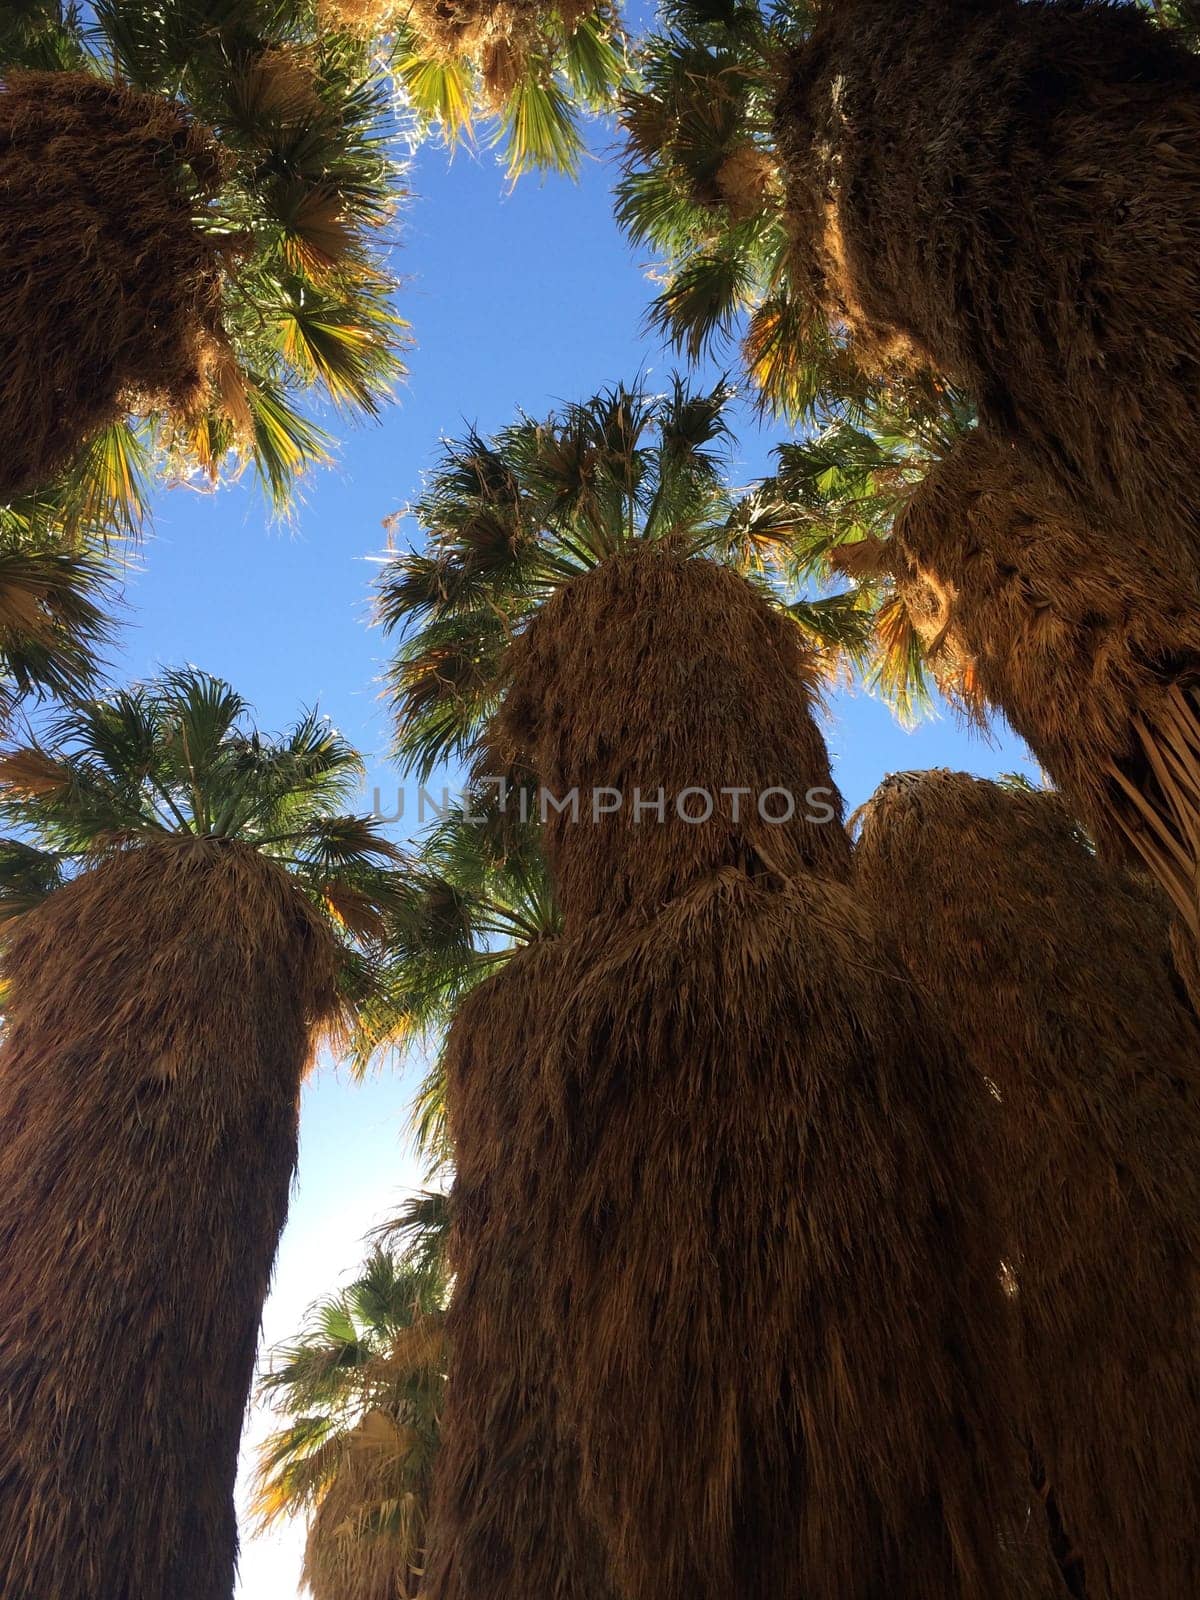 Palm Canyon Oasis, Palm Tree Grove, in Anza Borrego Desert State Park by grumblytumbleweed